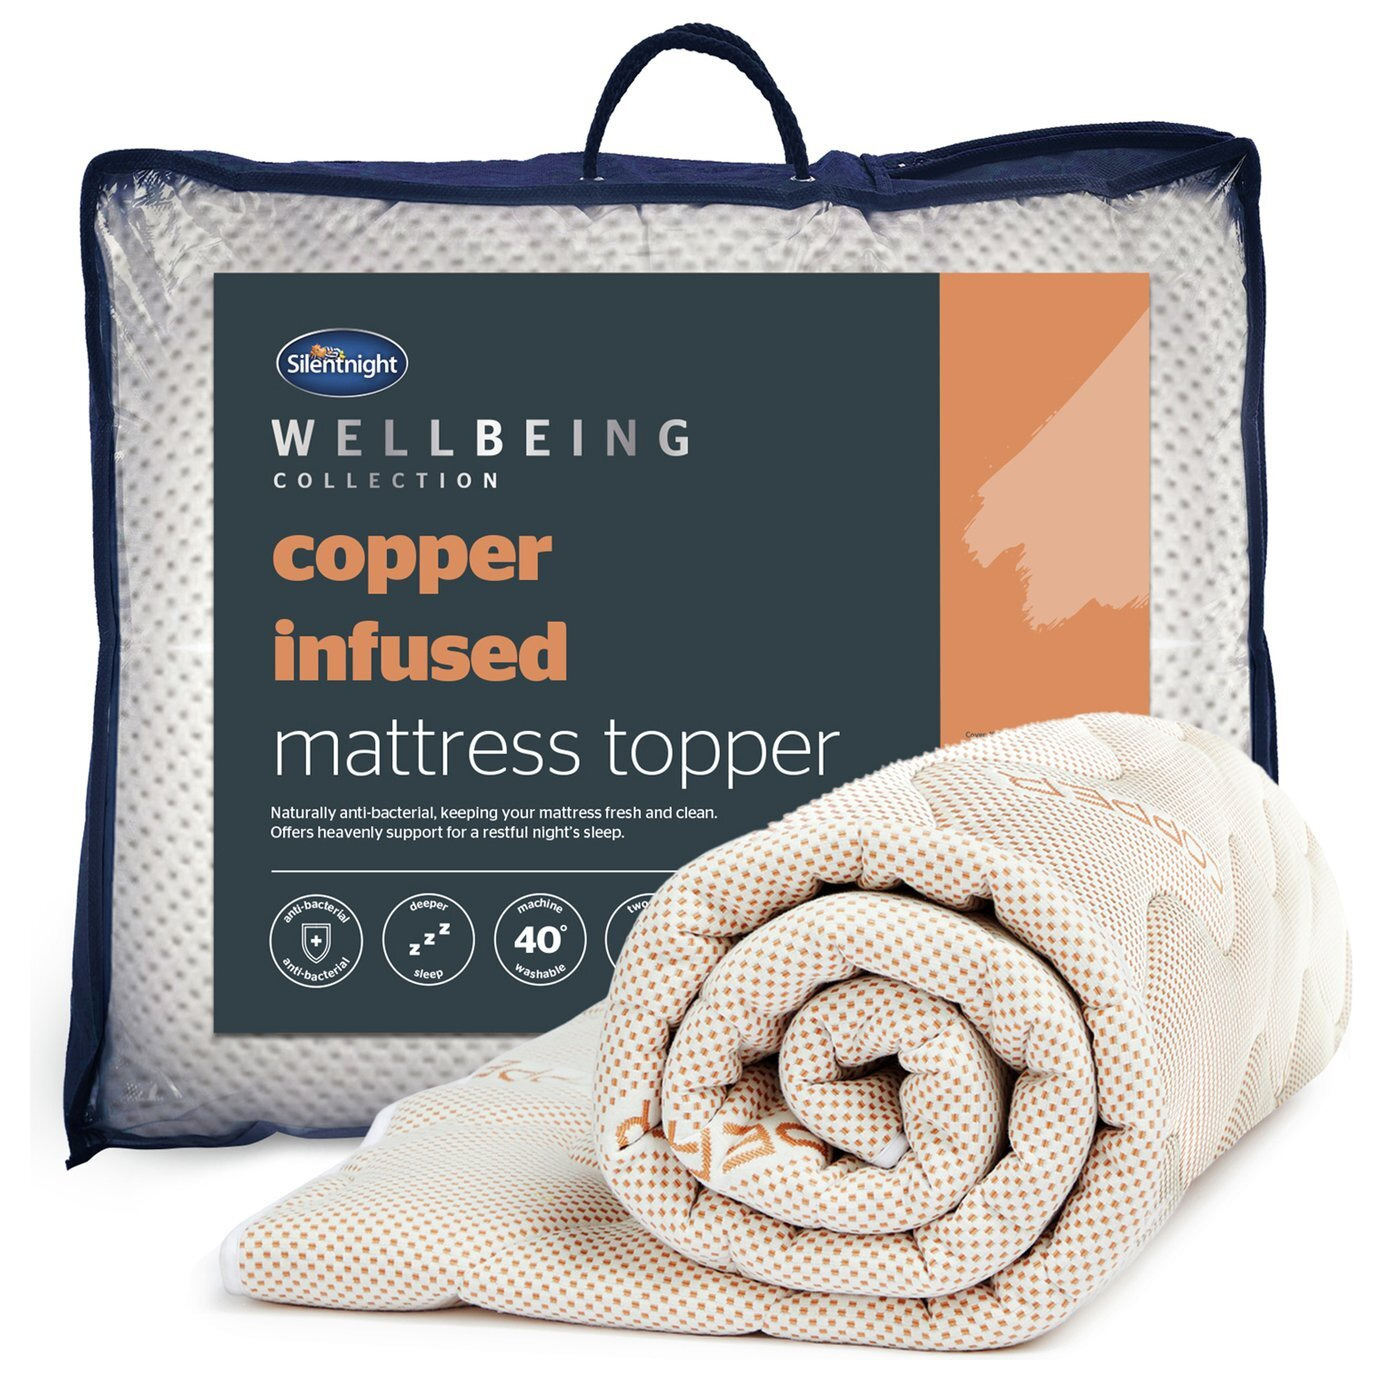 Silentnight Wellbeing Copper Infused Mattress Topper- Double - image 1